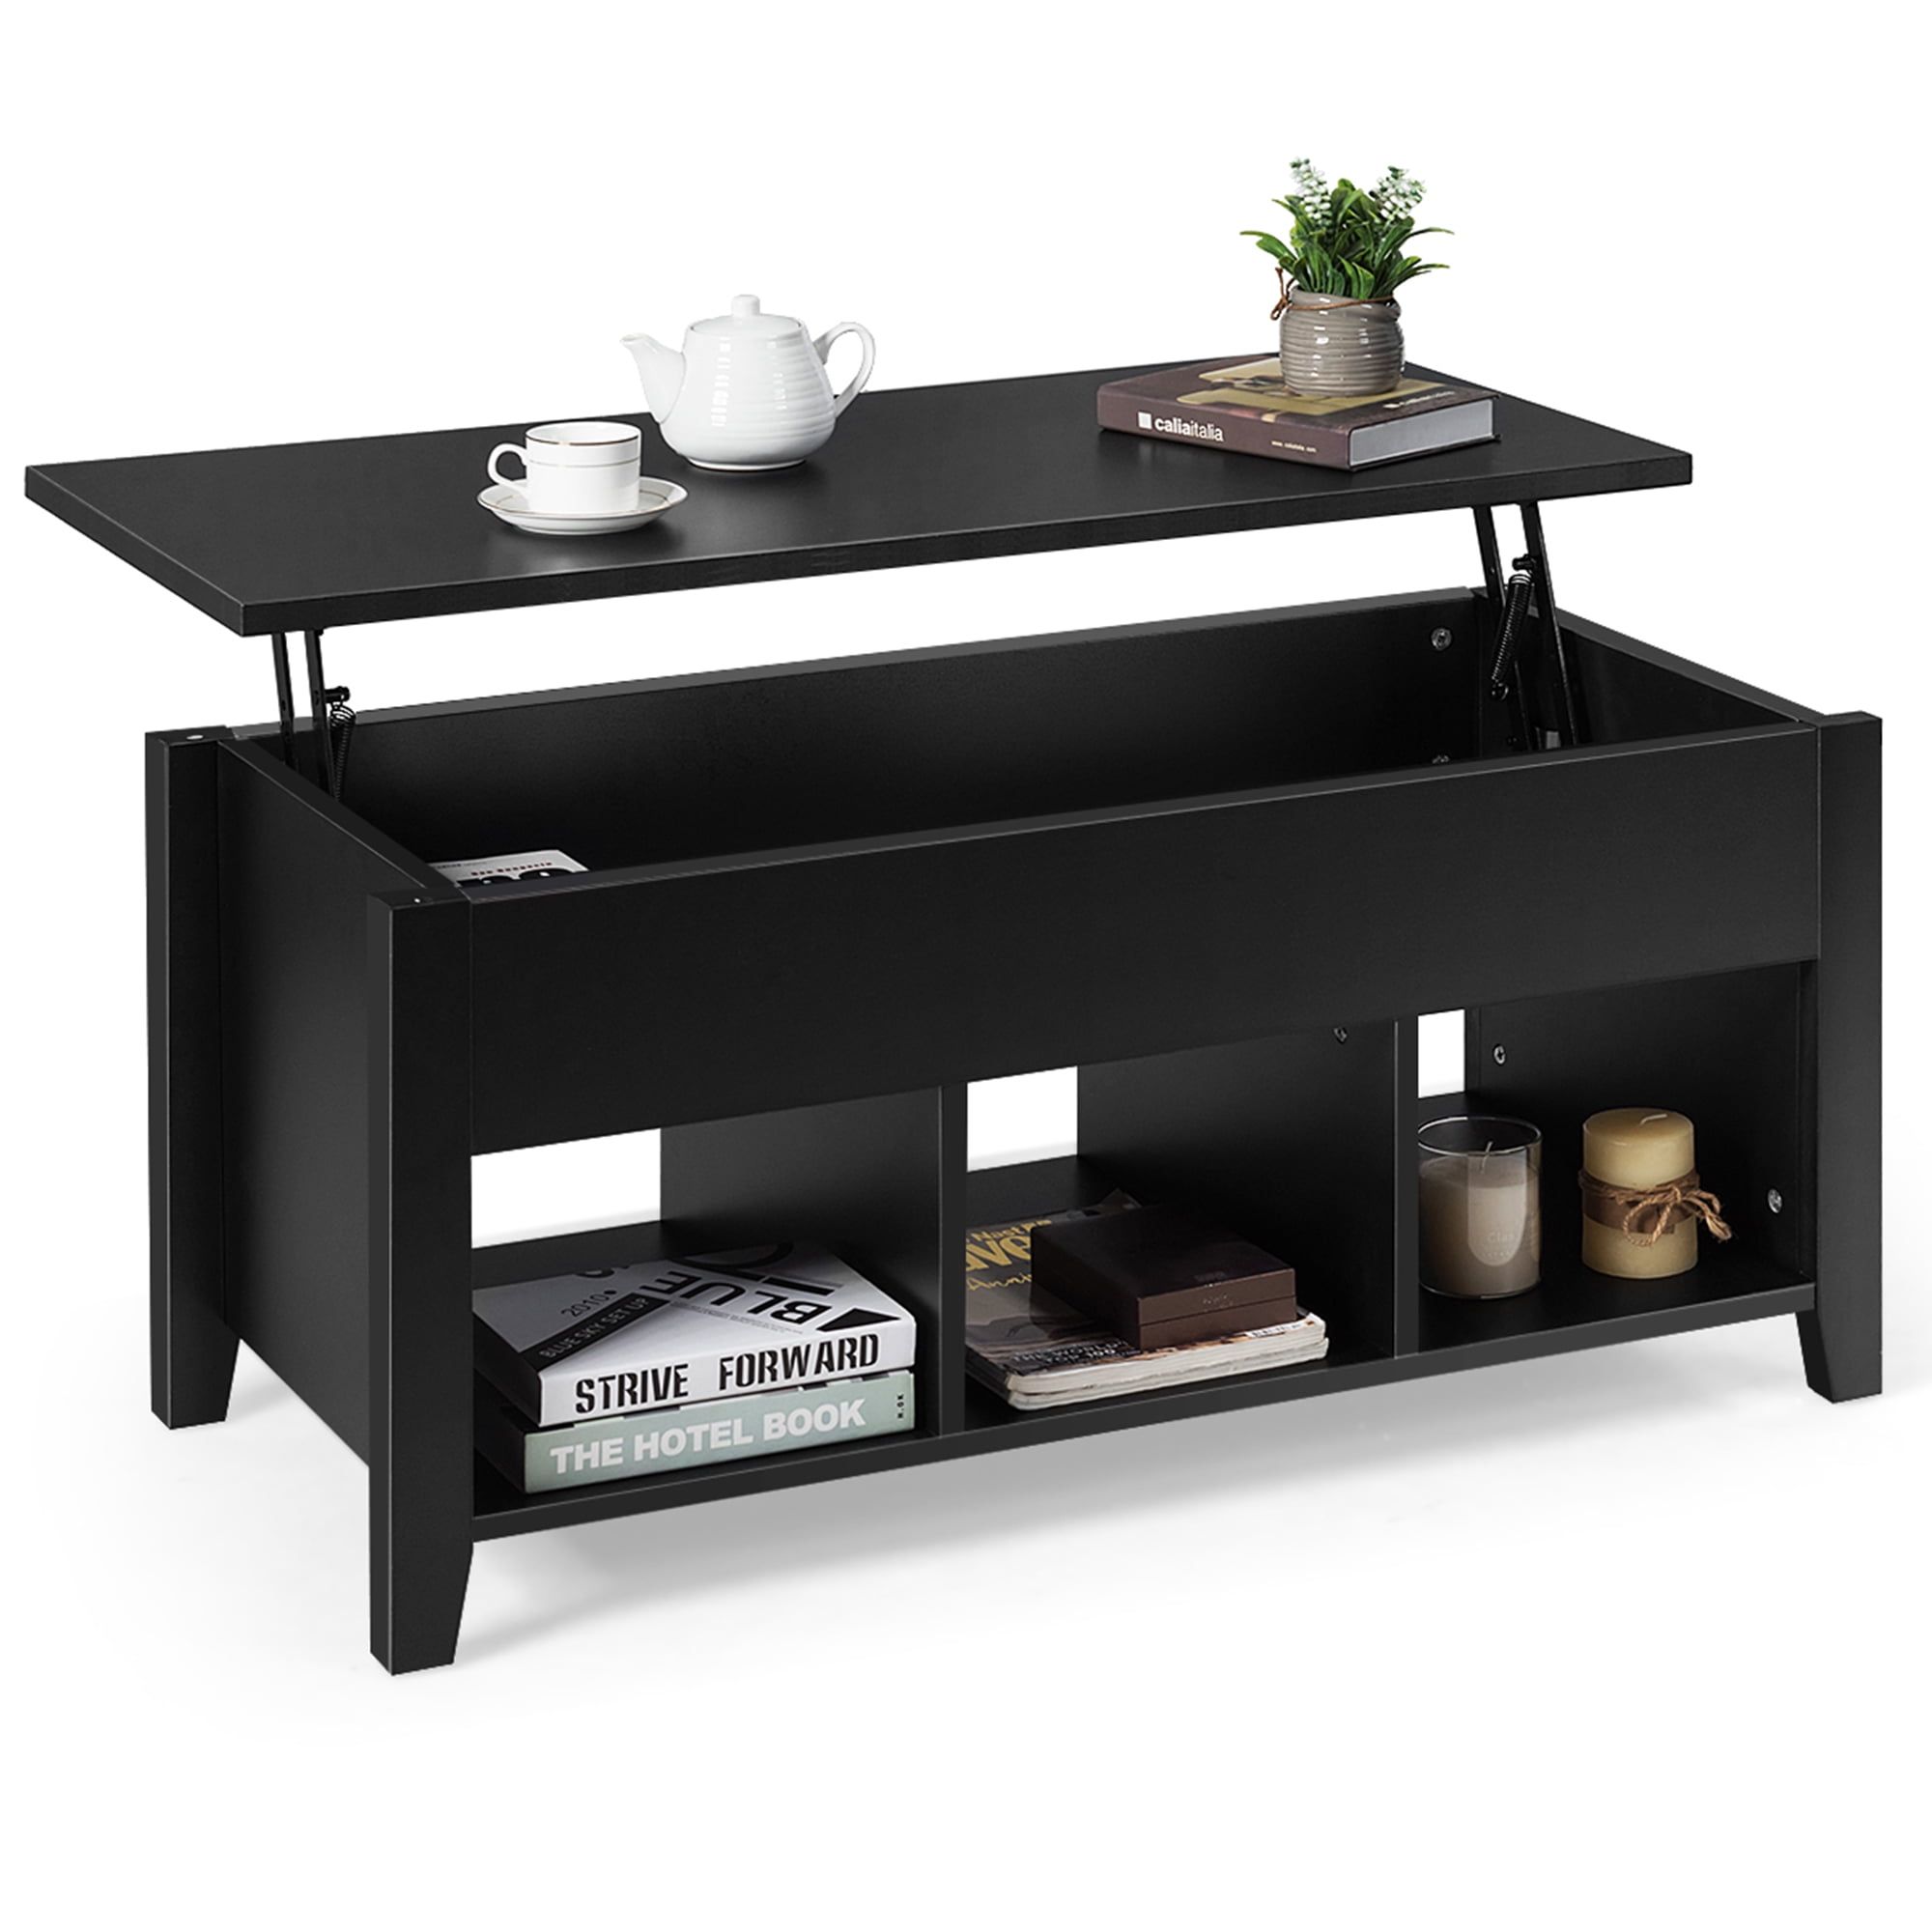 Gymax Lift Top Coffee Table W/ Storage Compartment Shelf Living Room In Lift Top Coffee Tables With Hidden Storage Compartments (Gallery 14 of 20)